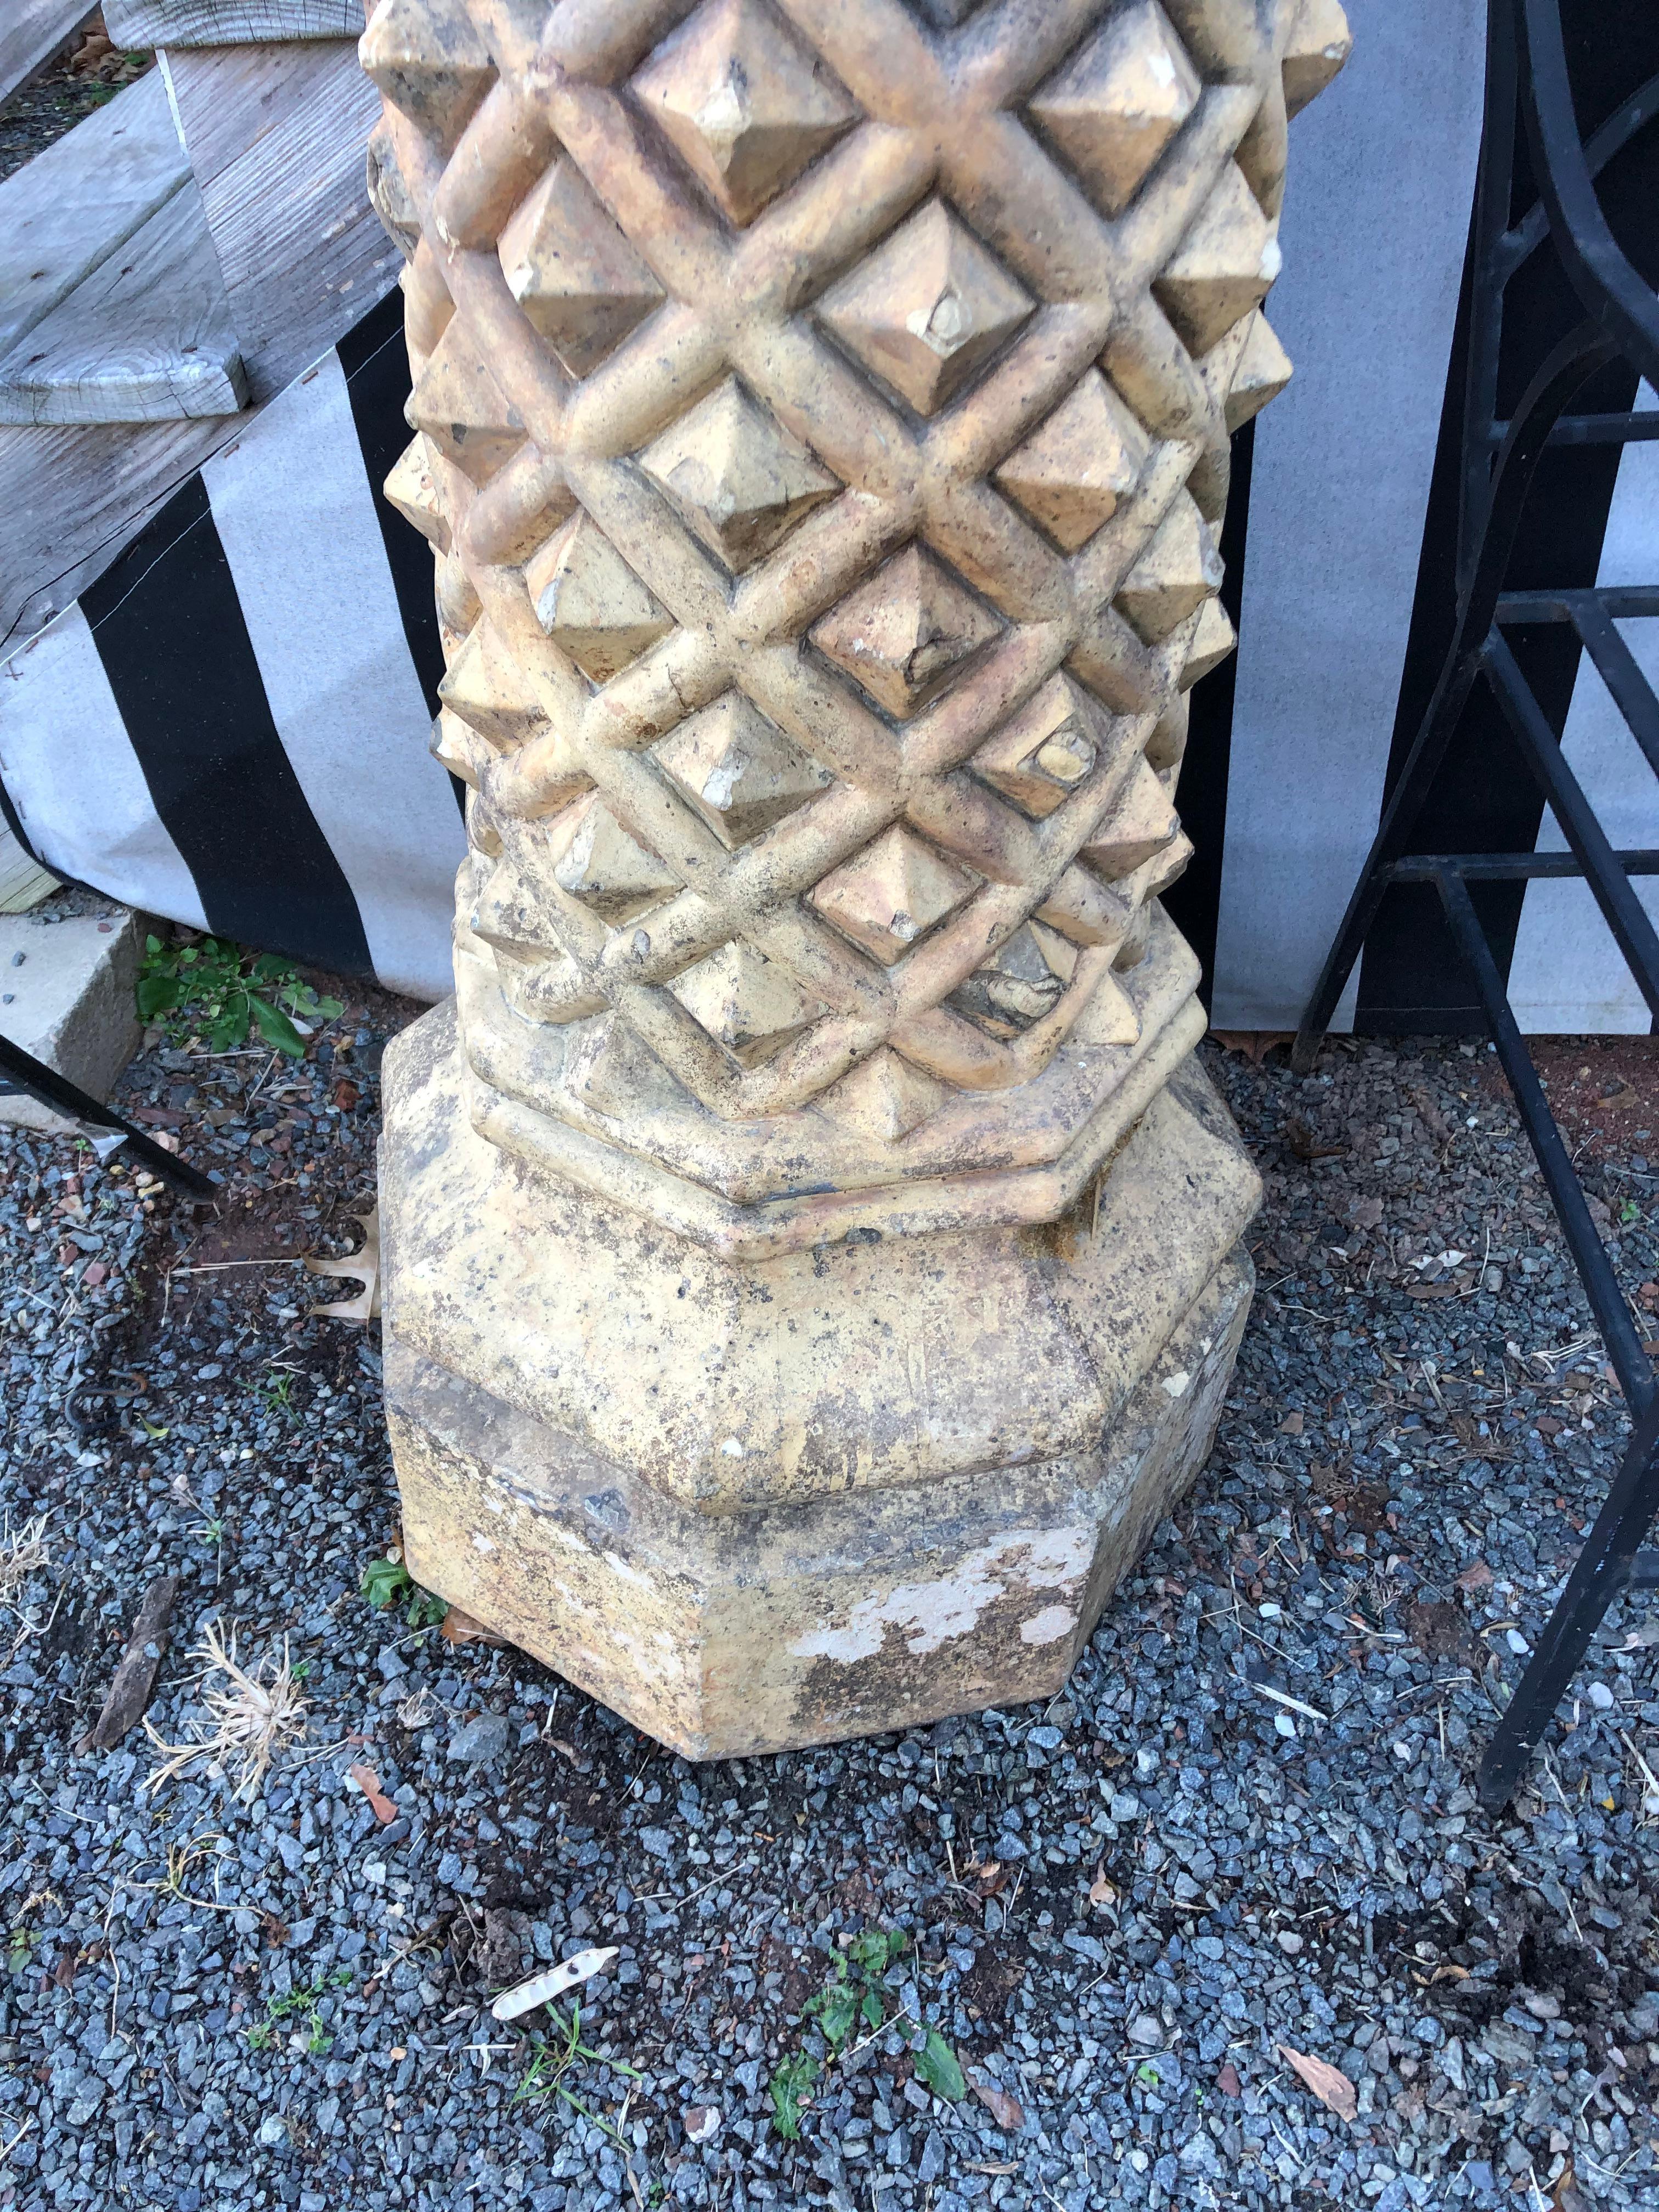 Probably the nicest 19th century English terra cotta chimney cap we have ever seen, like a sculpted porcupine of a column, paired with a bronze 20th century sundial. Beautiful in a garden or left of center home indoors! Incredible found object.